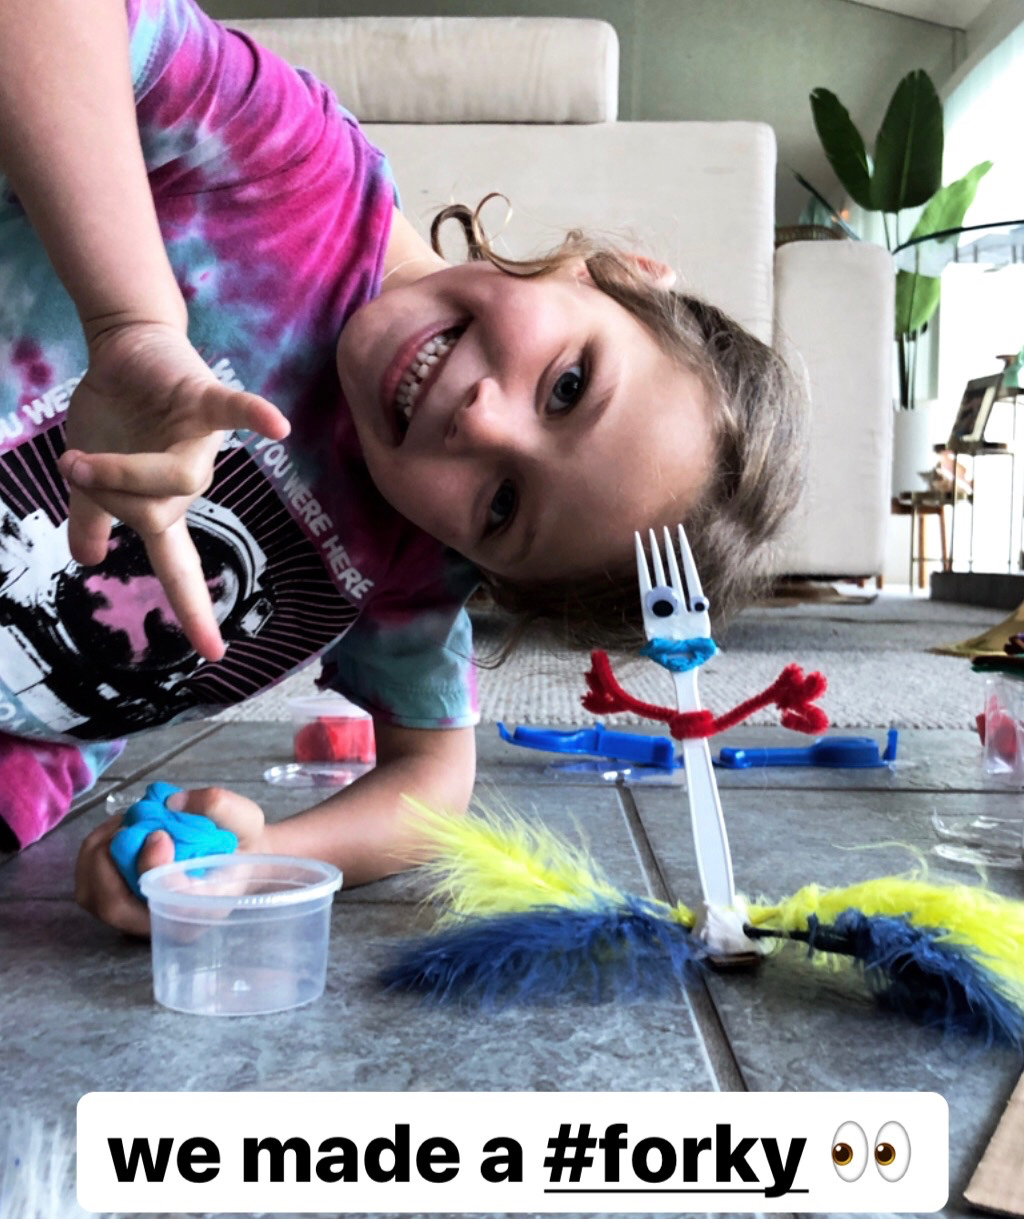 diy forky kit from toy story 4